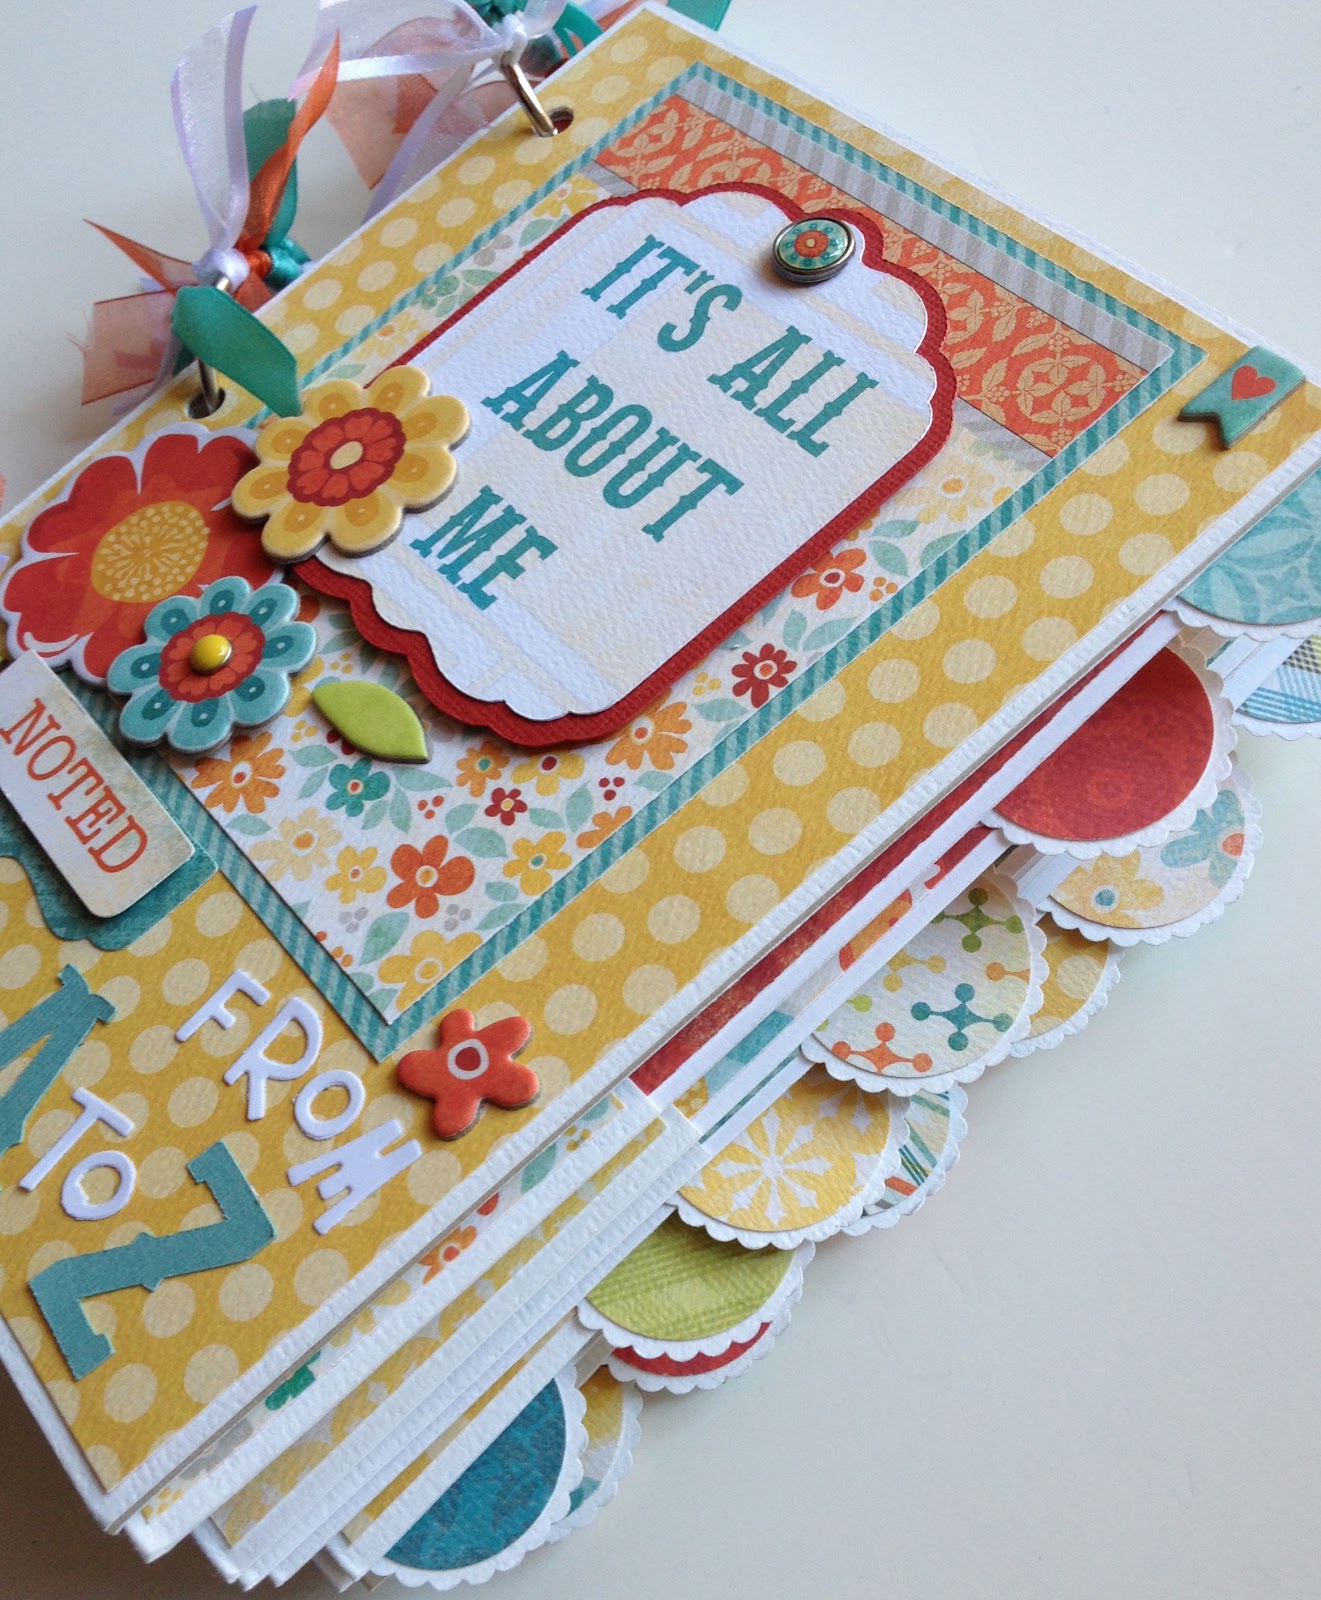 Artsy Albums Scrapbook Album And Page Layout Kits By Traci Penrod Its All About Me From A Z 